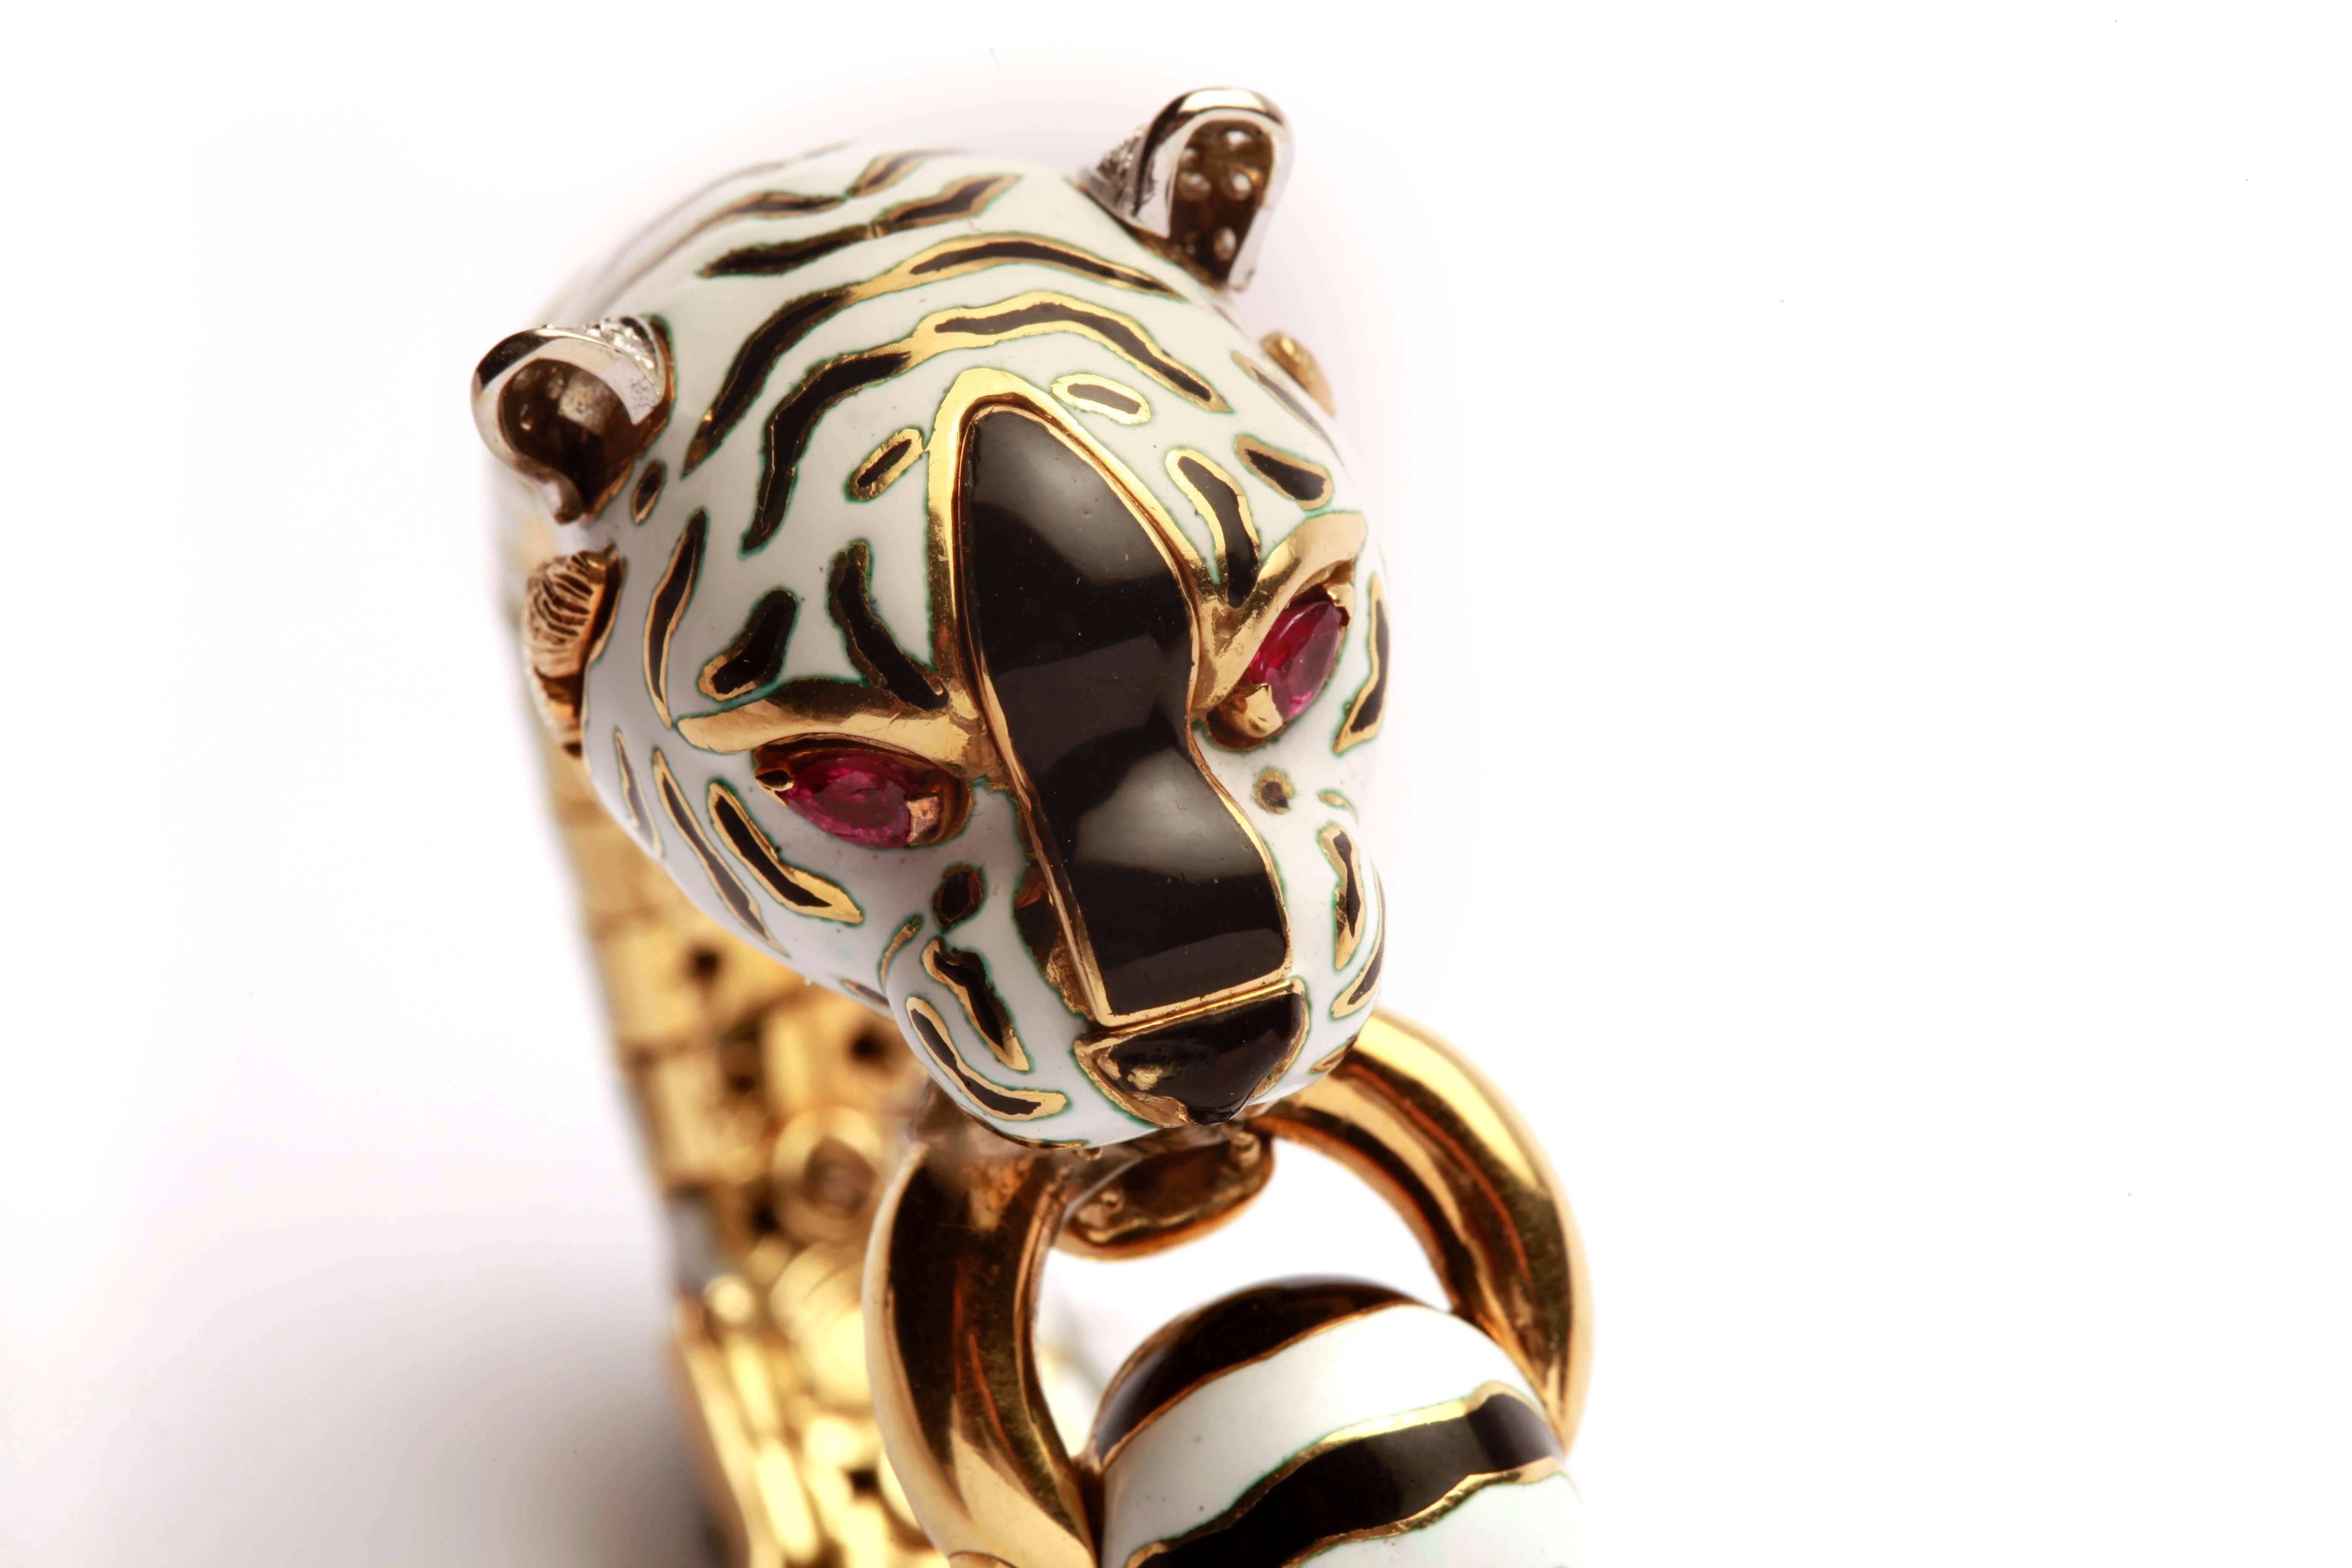 An iconic 18kt yellow gold bracelet by northern Italian master Frascarolo, representing a white Bengala Tiger, decorated with fine black and white enamel, as well as ruby eyes. Made in Italy, circa 1975.